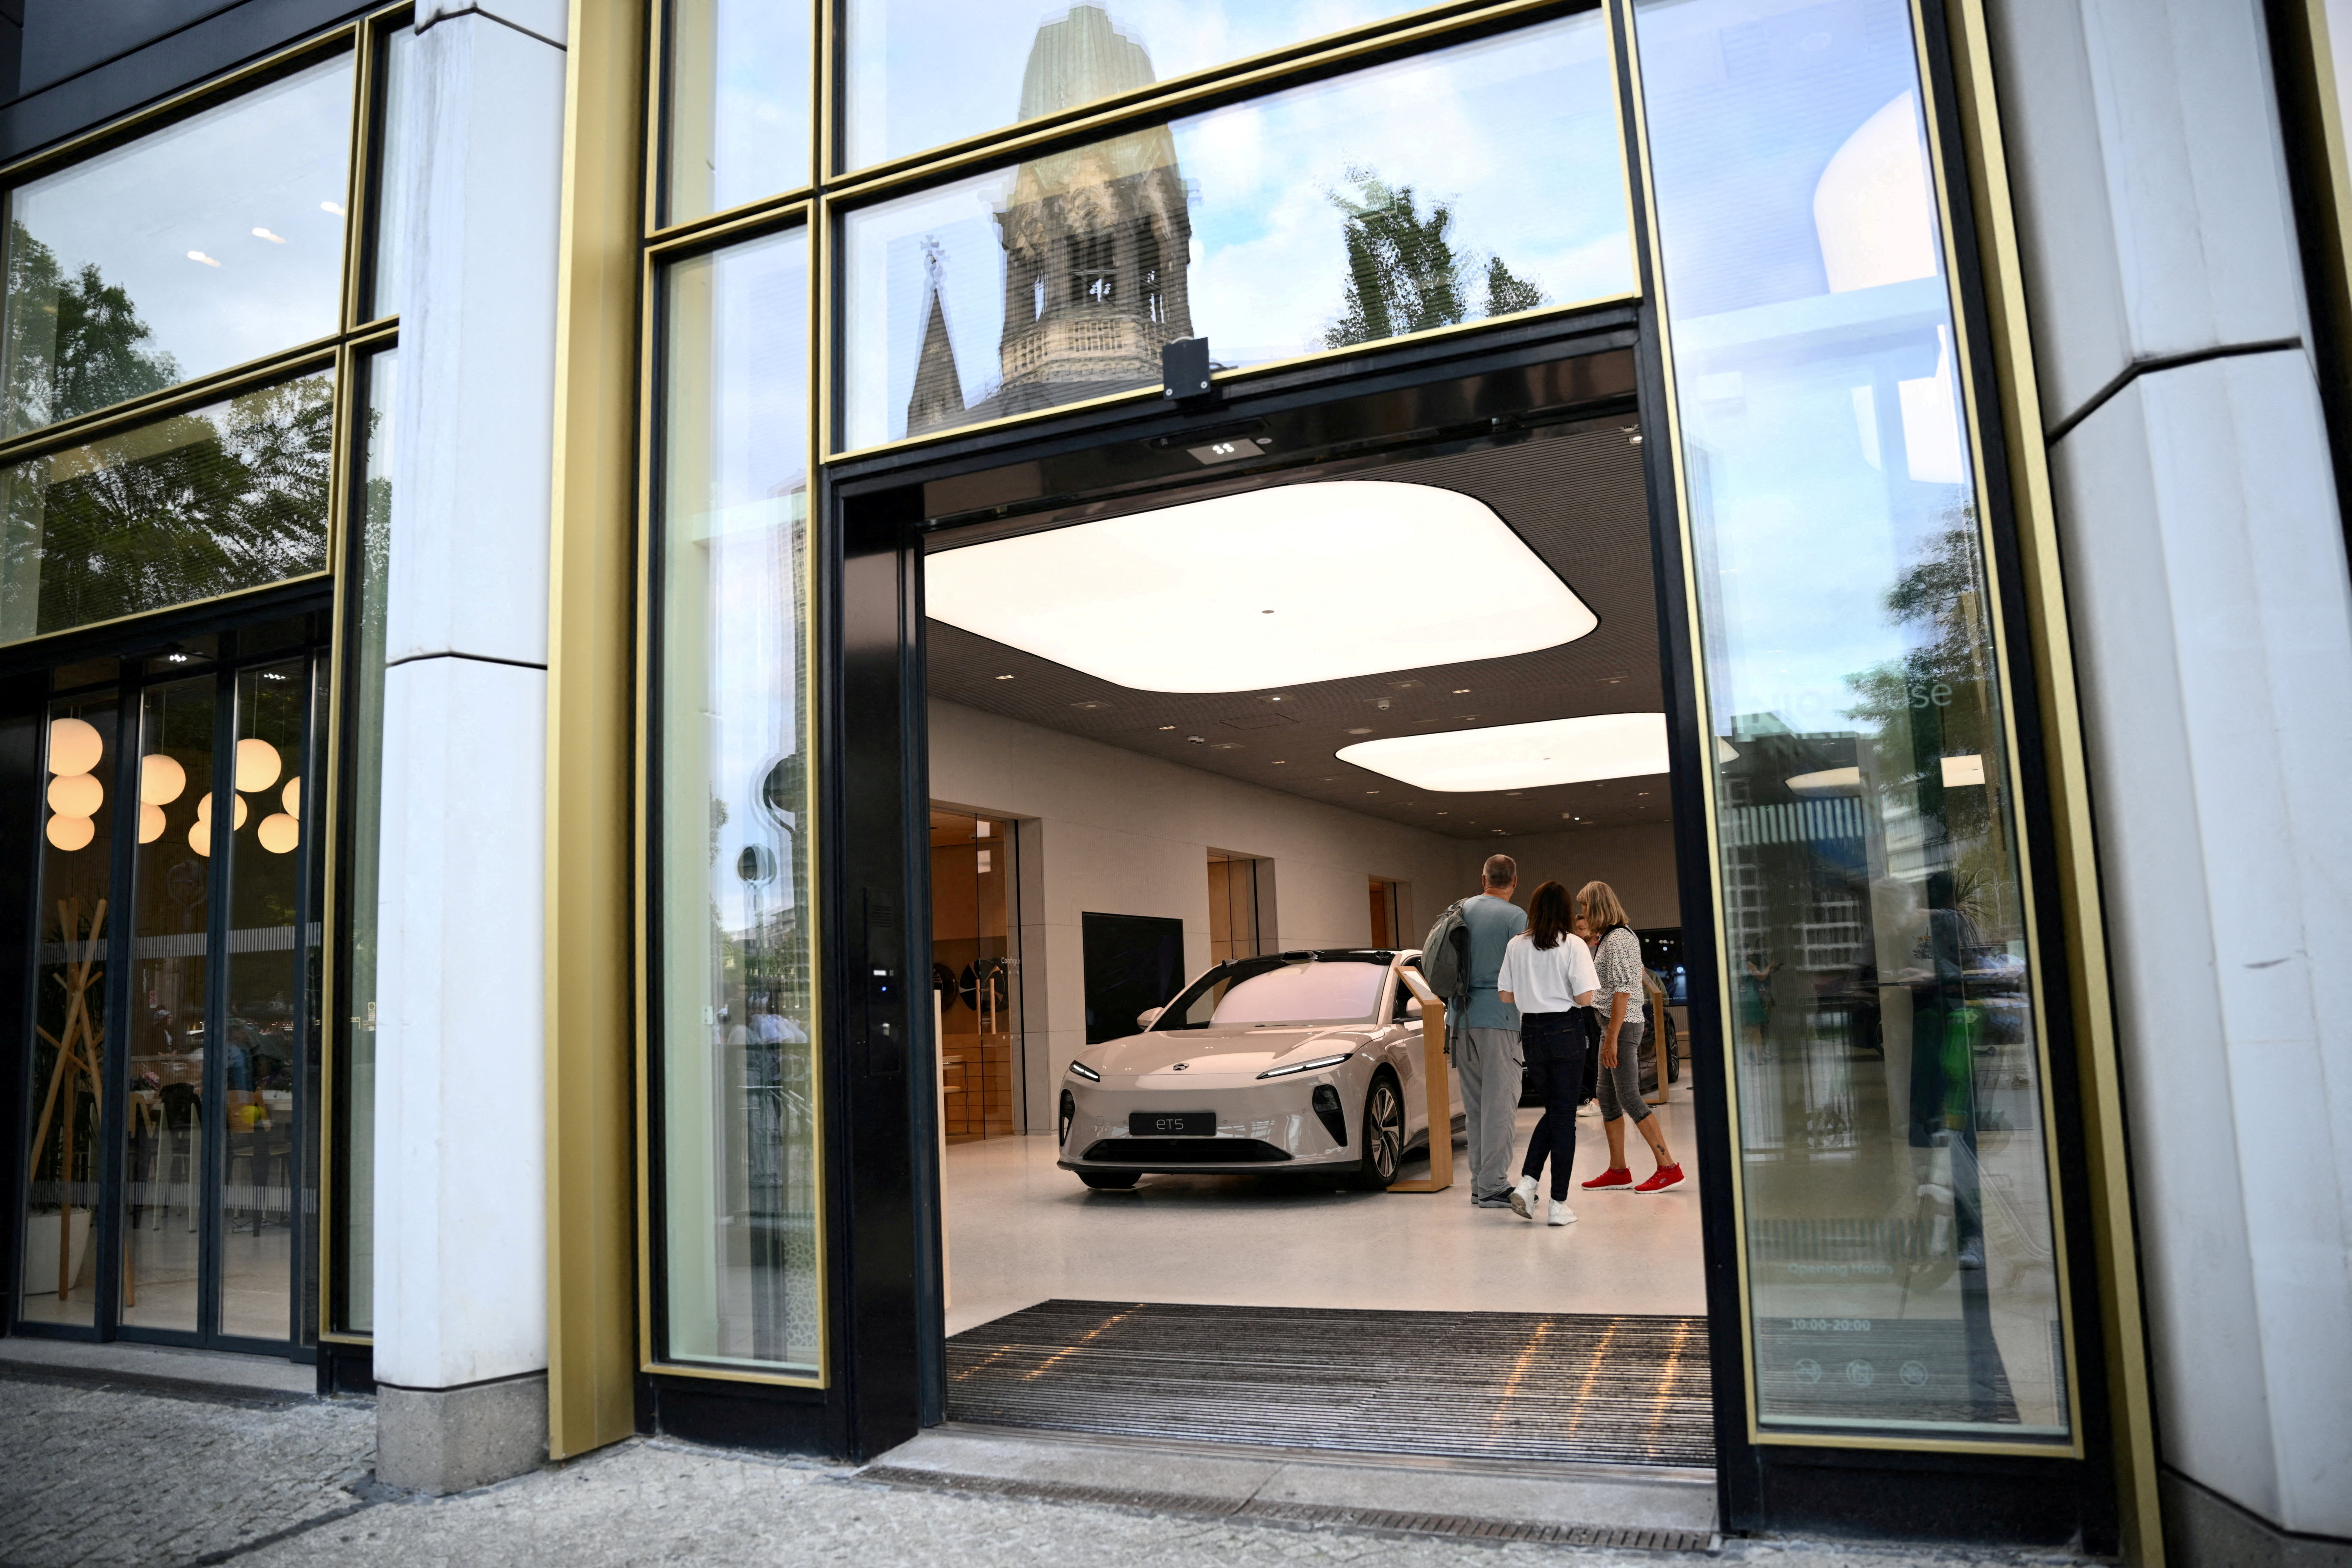 FILE PHOTO: People stand near NIO ET5 car model at the NIO House, the showroom of the Chinese premium smart electric vehicle manufacture NIO Inc. in Berlin